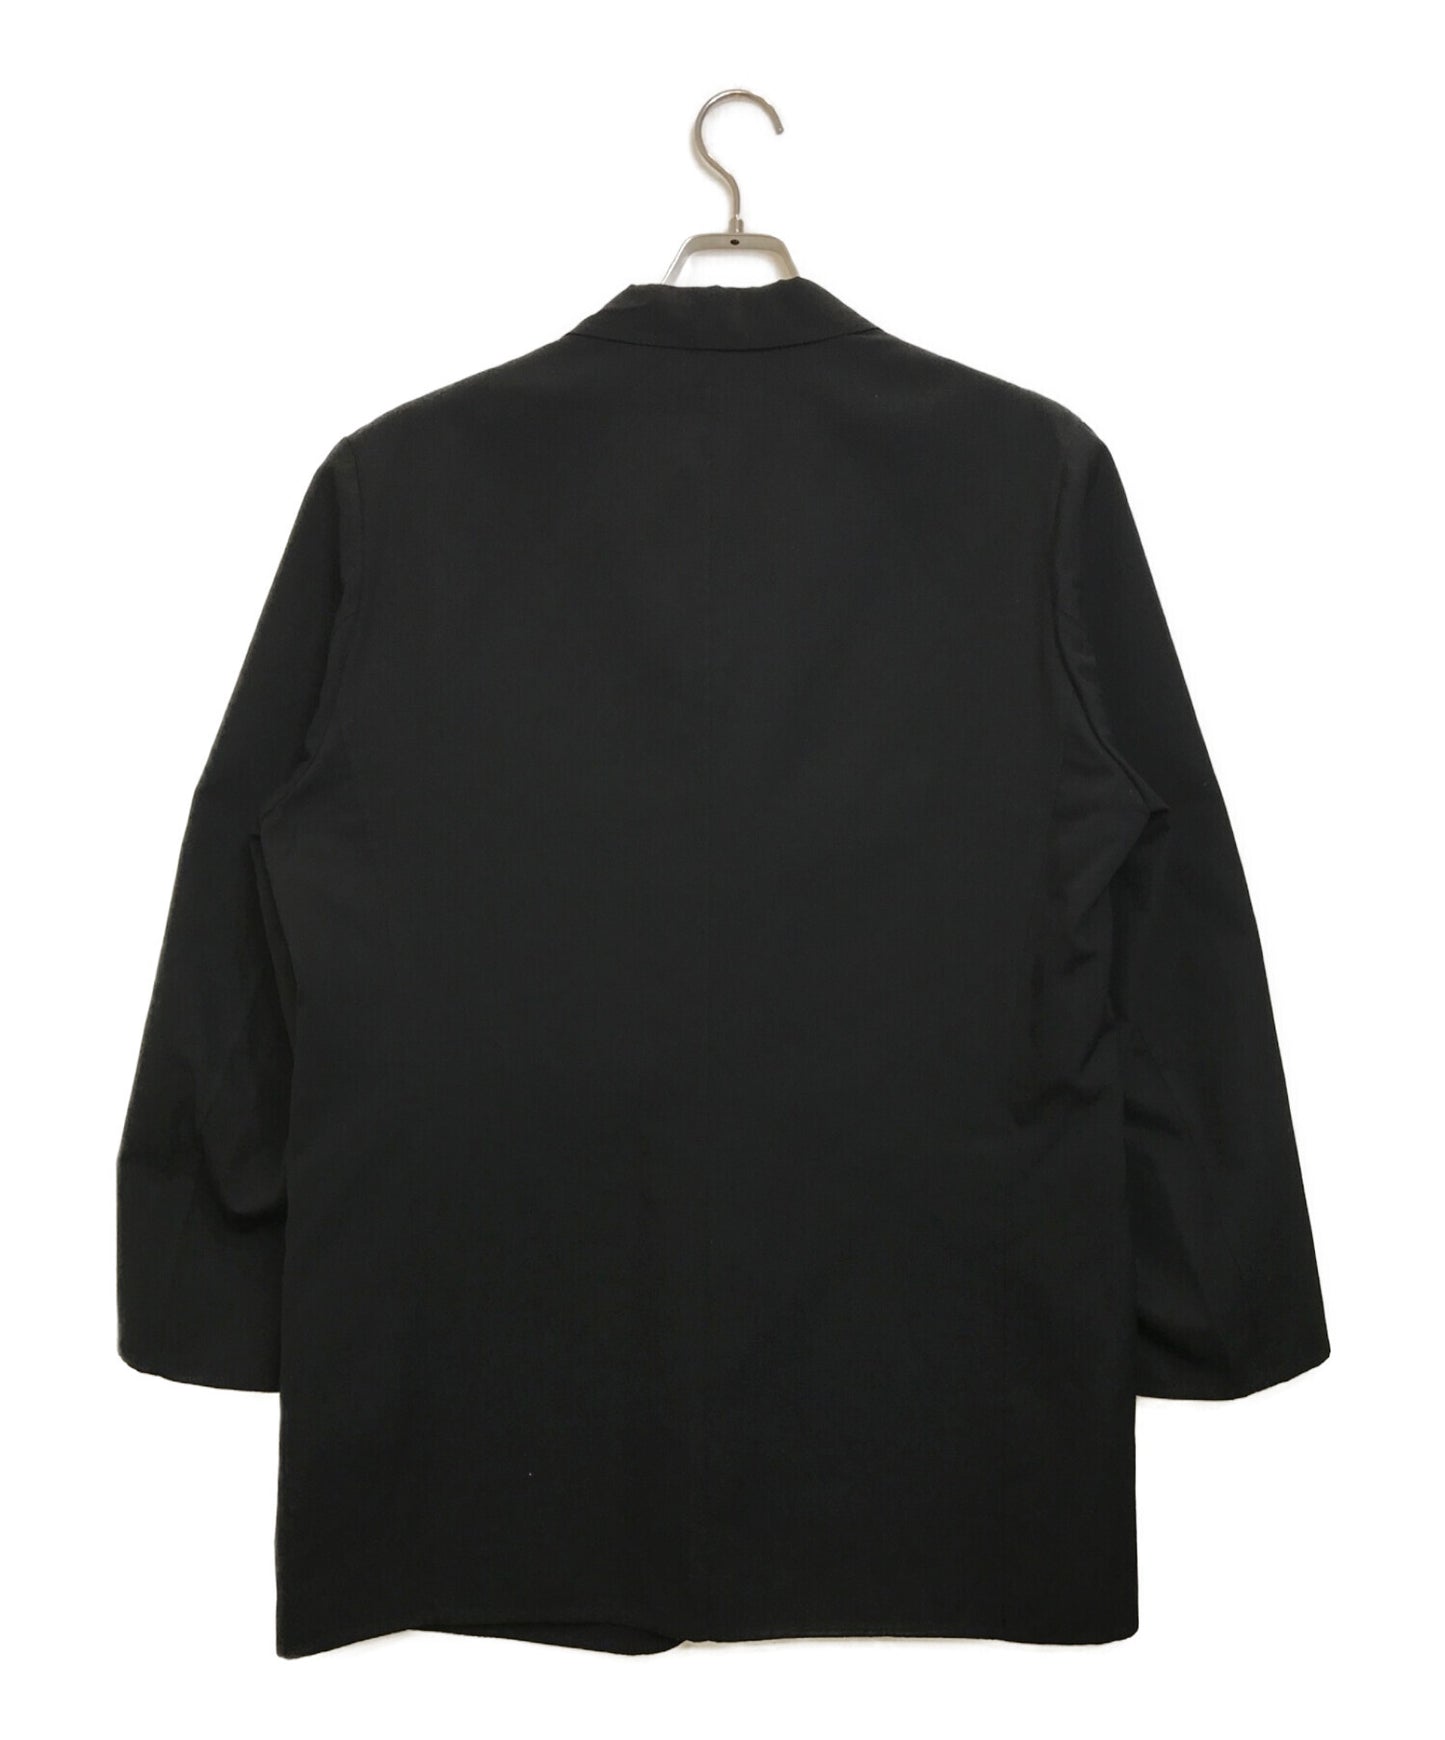 [Pre-owned] Yohji Yamamoto COSTUME D'HOMME tailored jacket